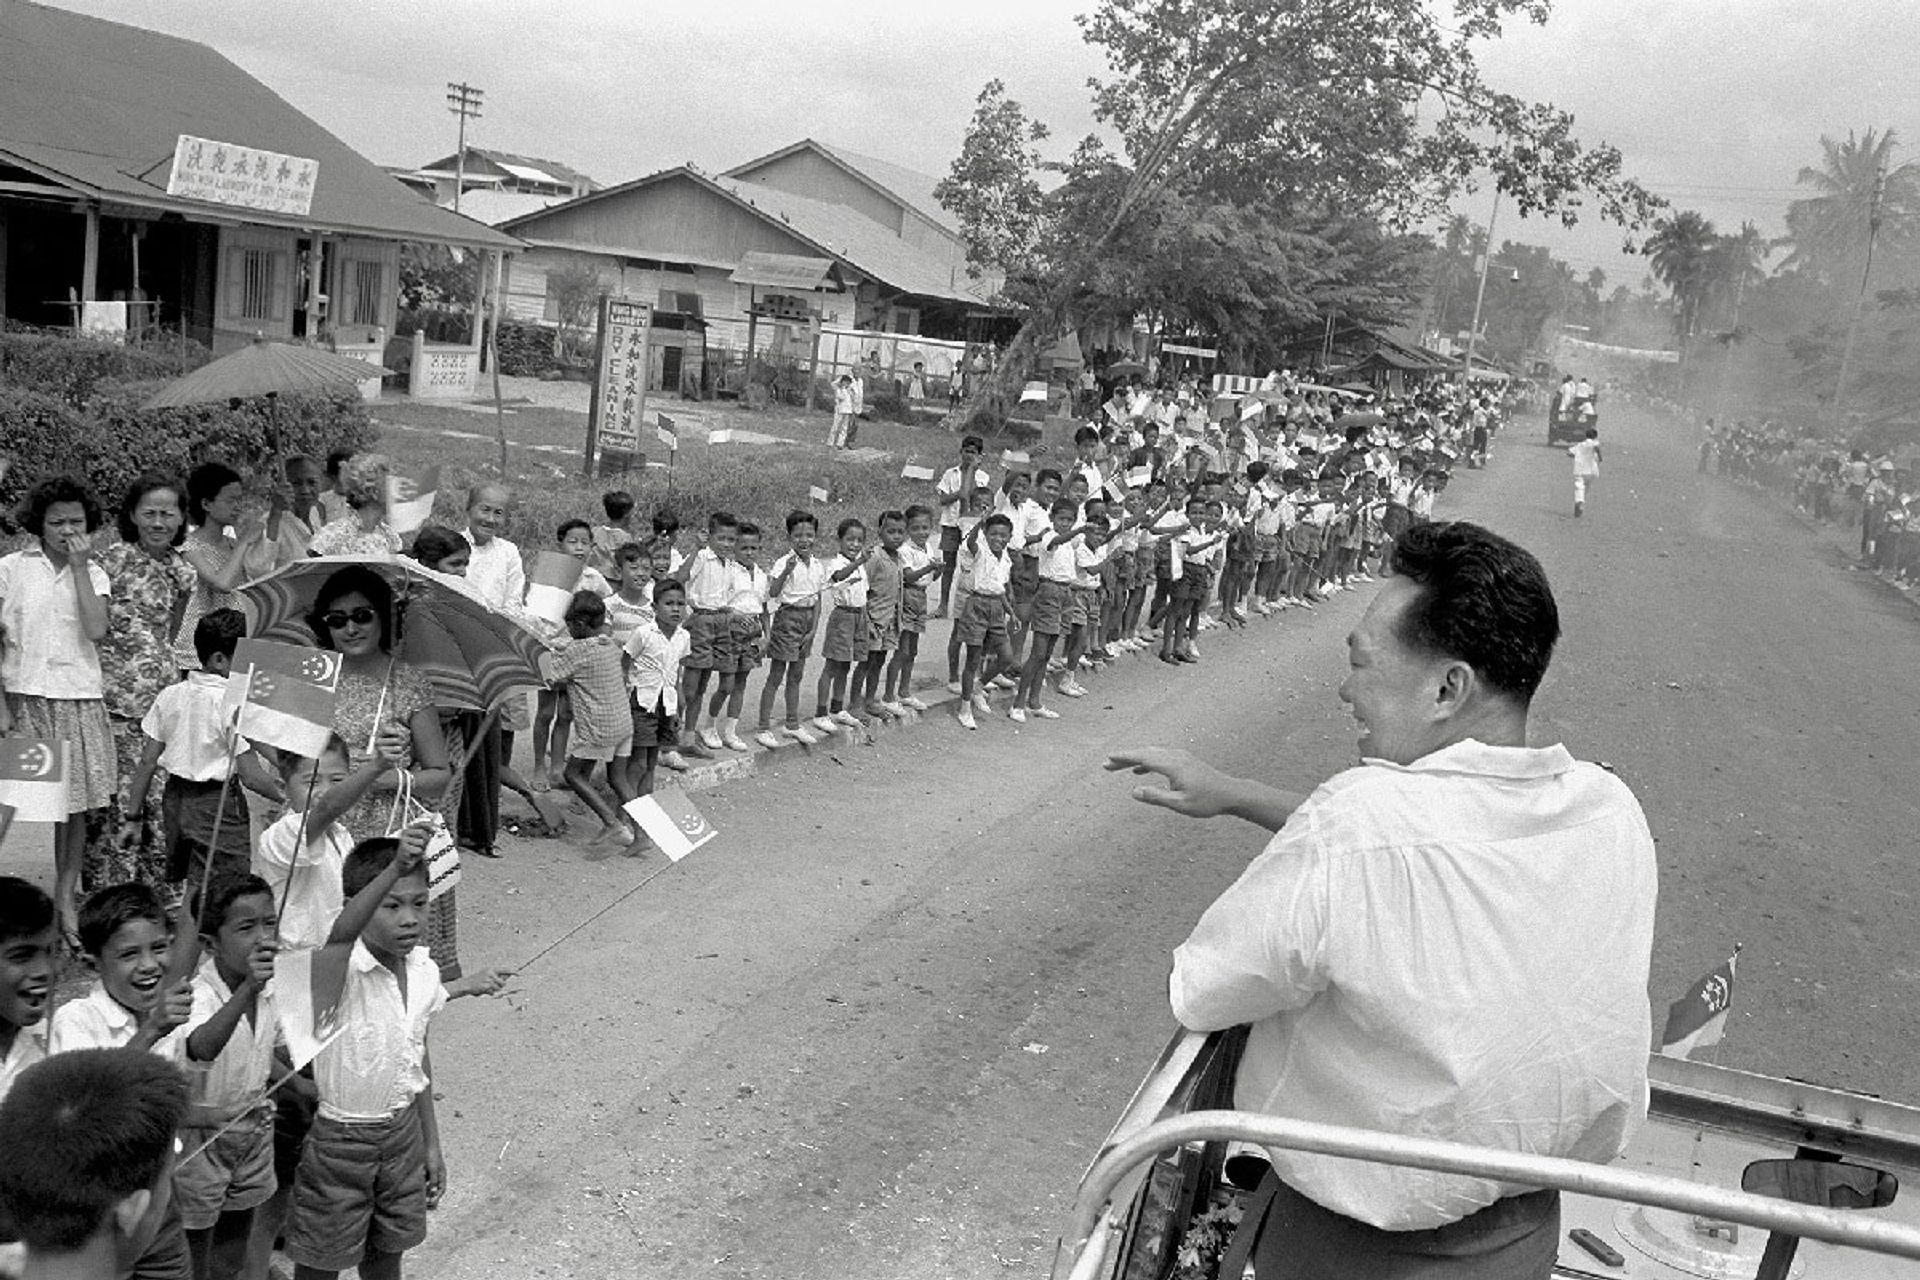 Mr Lee waving to schoolchildren from his campaign vehicle during his tour of Kampong Kembangan on Jan 12, 1963. Source: MCI collection